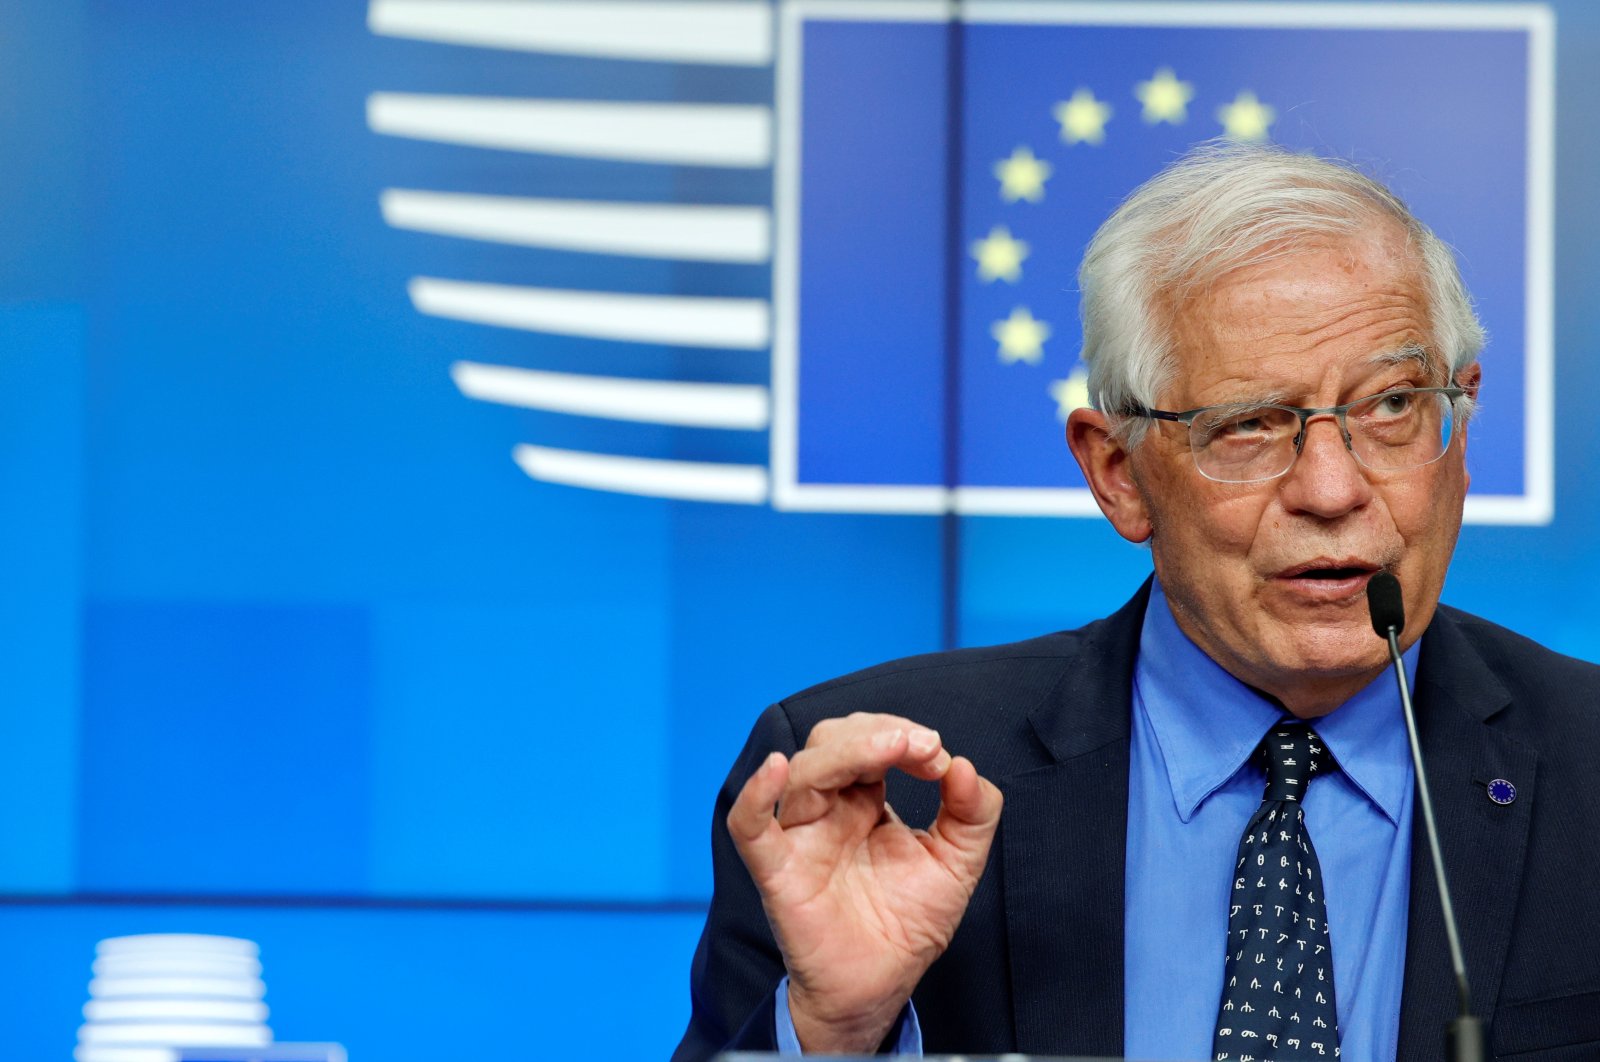 European Union foreign policy chief Josep Borrell speaks during a news conference after a meeting of EU foreign ministers at the European Council building, in Brussels, Belgium May 10, 2021. (Reuters Photo)